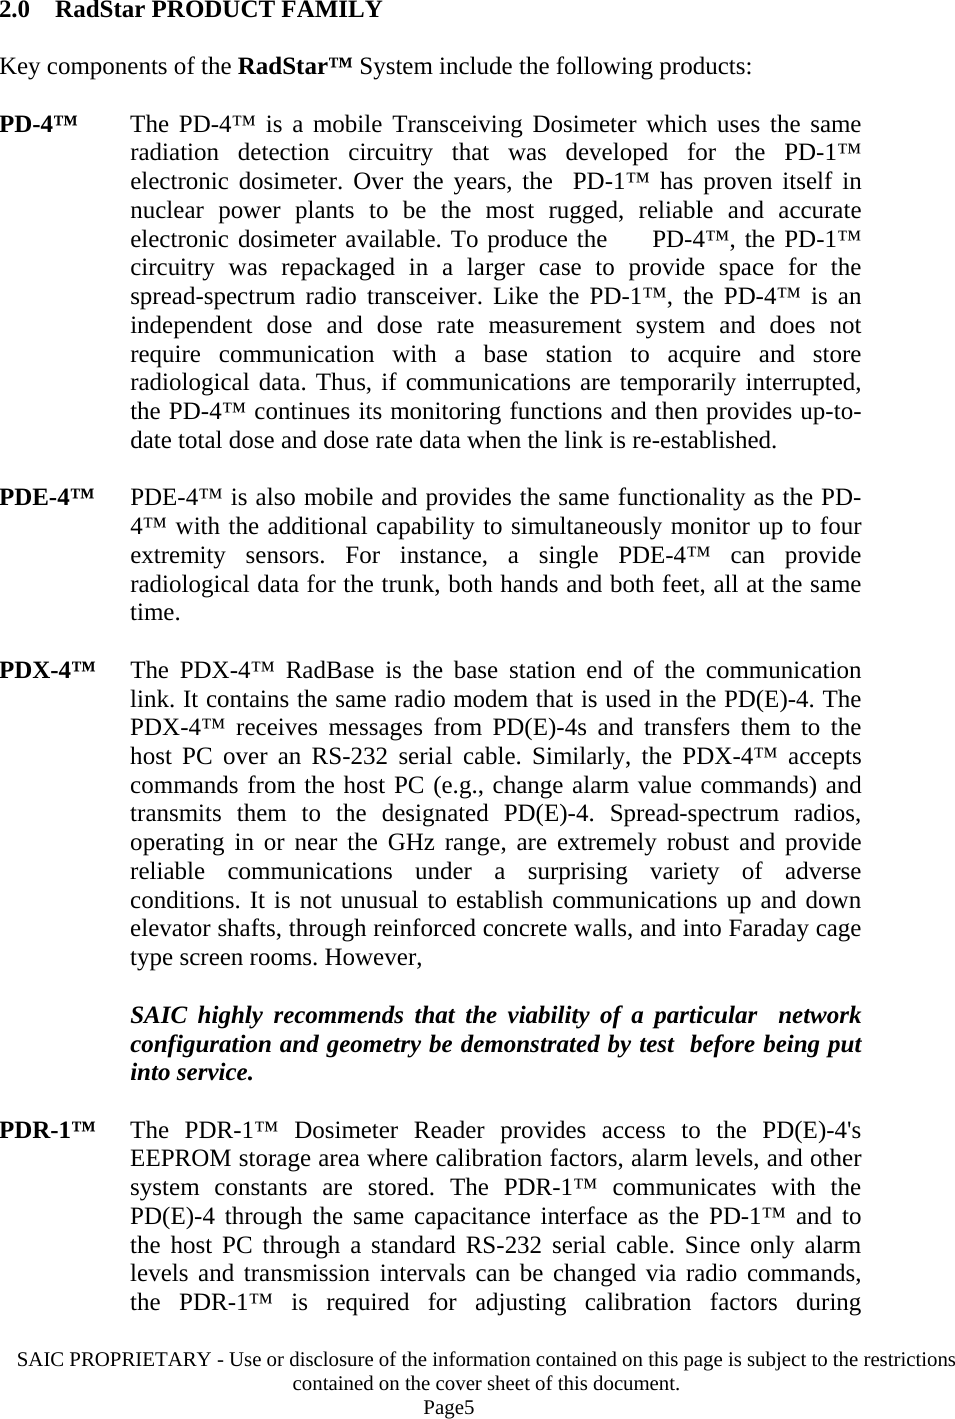 SAIC PROPRIETARY - Use or disclosure of the information contained on this page is subject to the restrictions contained on the cover sheet of this document.    Page5 2.0    RadStar PRODUCT FAMILY  Key components of the RadStar™ System include the following products:  PD-4™   The PD-4™ is a mobile Transceiving Dosimeter which uses the same radiation detection circuitry that was developed for the PD-1™ electronic dosimeter. Over the years, the  PD-1™ has proven itself in nuclear power plants to be the most rugged, reliable and accurate electronic dosimeter available. To produce the     PD-4™, the PD-1™ circuitry was repackaged in a larger case to provide space for the spread-spectrum radio transceiver. Like the PD-1™, the PD-4™ is an independent dose and dose rate measurement system and does not require communication with a base station to acquire and store radiological data. Thus, if communications are temporarily interrupted, the PD-4™ continues its monitoring functions and then provides up-to-date total dose and dose rate data when the link is re-established.  PDE-4™   PDE-4™ is also mobile and provides the same functionality as the PD-4™ with the additional capability to simultaneously monitor up to four extremity sensors. For instance, a single PDE-4™ can provide radiological data for the trunk, both hands and both feet, all at the same time.  PDX-4™   The PDX-4™ RadBase is the base station end of the communication link. It contains the same radio modem that is used in the PD(E)-4. The PDX-4™ receives messages from PD(E)-4s and transfers them to the host PC over an RS-232 serial cable. Similarly, the PDX-4™ accepts commands from the host PC (e.g., change alarm value commands) and transmits them to the designated PD(E)-4. Spread-spectrum radios, operating in or near the GHz range, are extremely robust and provide reliable communications under a surprising variety of adverse conditions. It is not unusual to establish communications up and down elevator shafts, through reinforced concrete walls, and into Faraday cage type screen rooms. However,    SAIC highly recommends that the viability of a particular  network configuration and geometry be demonstrated by test  before being put into service.  PDR-1™   The PDR-1™ Dosimeter Reader provides access to the PD(E)-4&apos;s EEPROM storage area where calibration factors, alarm levels, and other system constants are stored. The PDR-1™ communicates with the PD(E)-4 through the same capacitance interface as the PD-1™ and to the host PC through a standard RS-232 serial cable. Since only alarm levels and transmission intervals can be changed via radio commands, the PDR-1™ is required for adjusting calibration factors during 